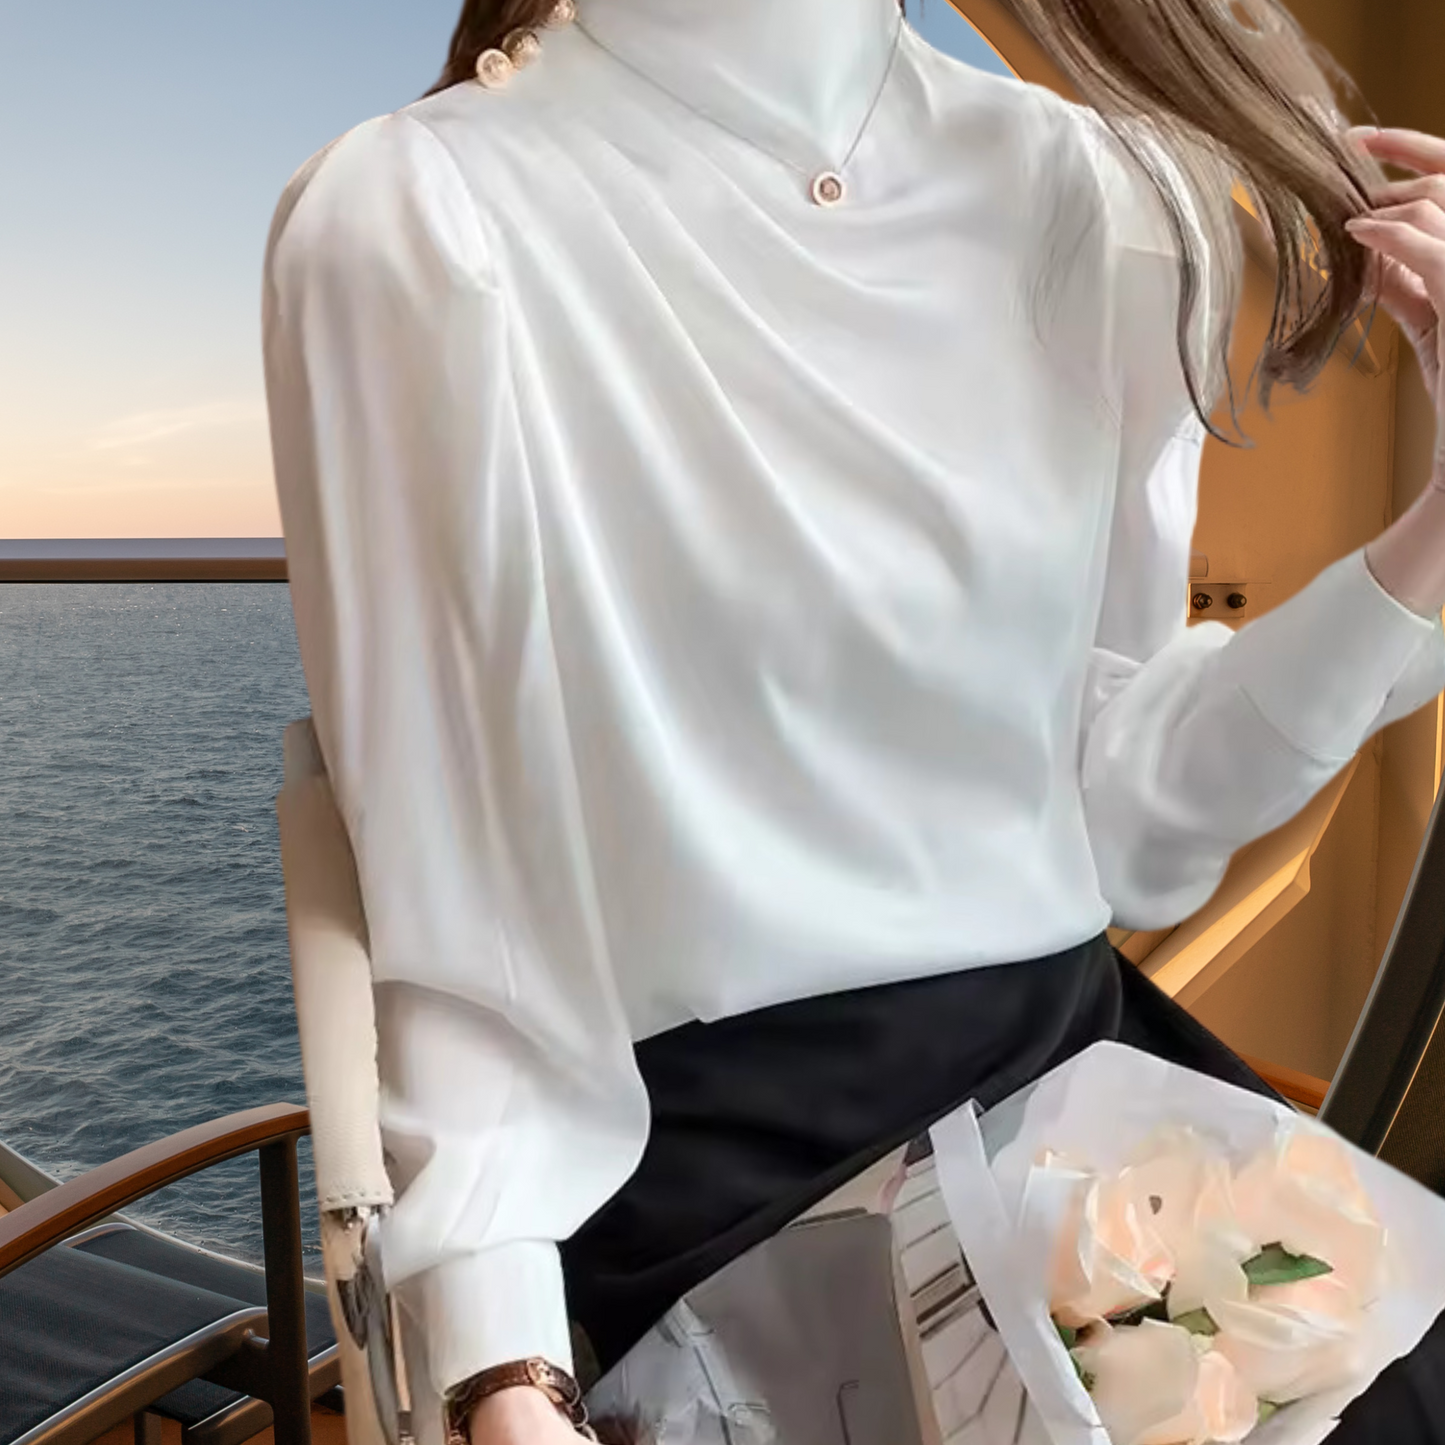 Puff Perfection: Elegant Stain Long Sleeve, gifts for her